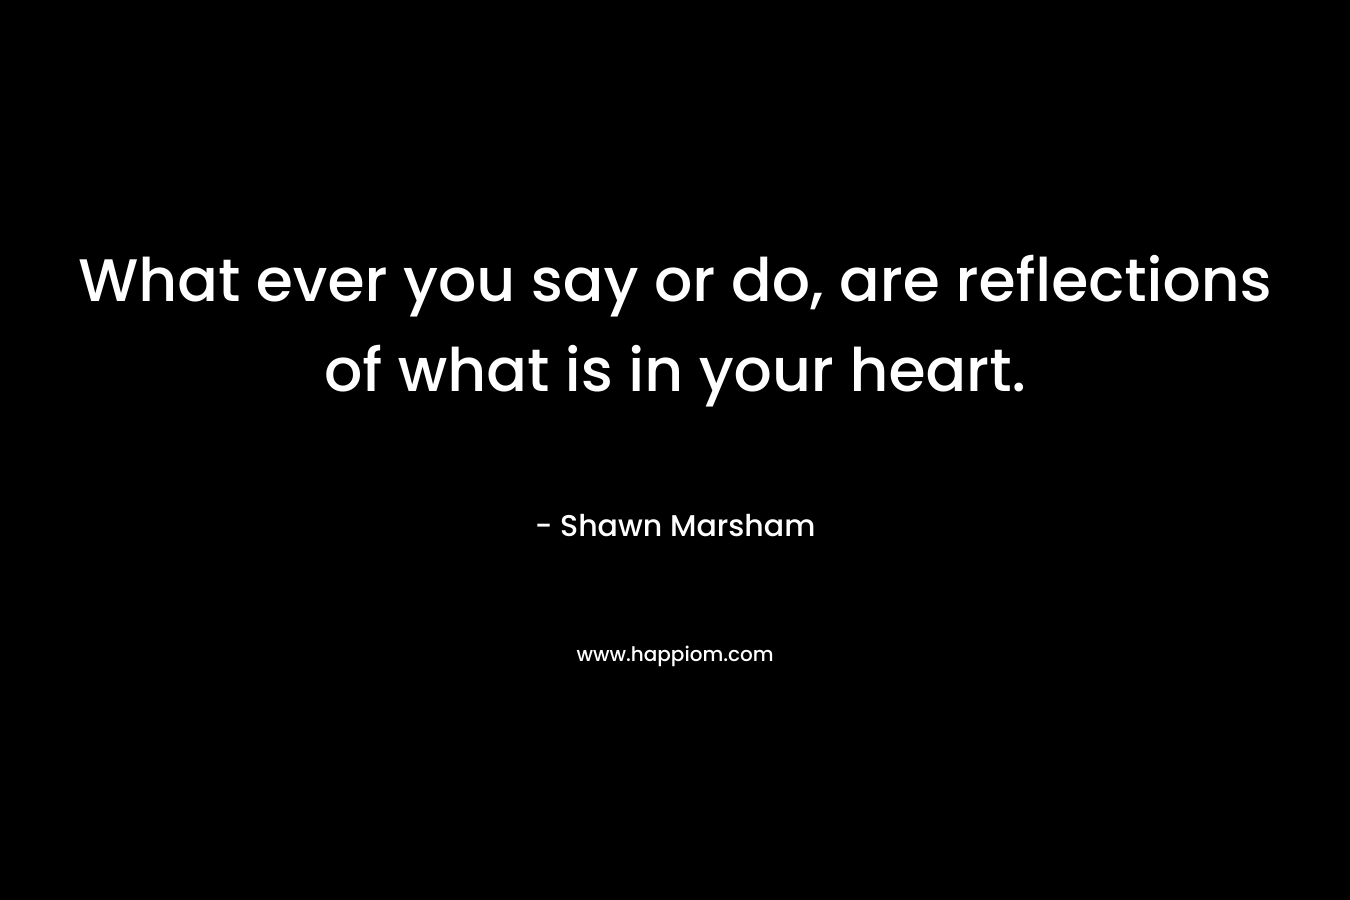 What ever you say or do, are reflections of what is in your heart.